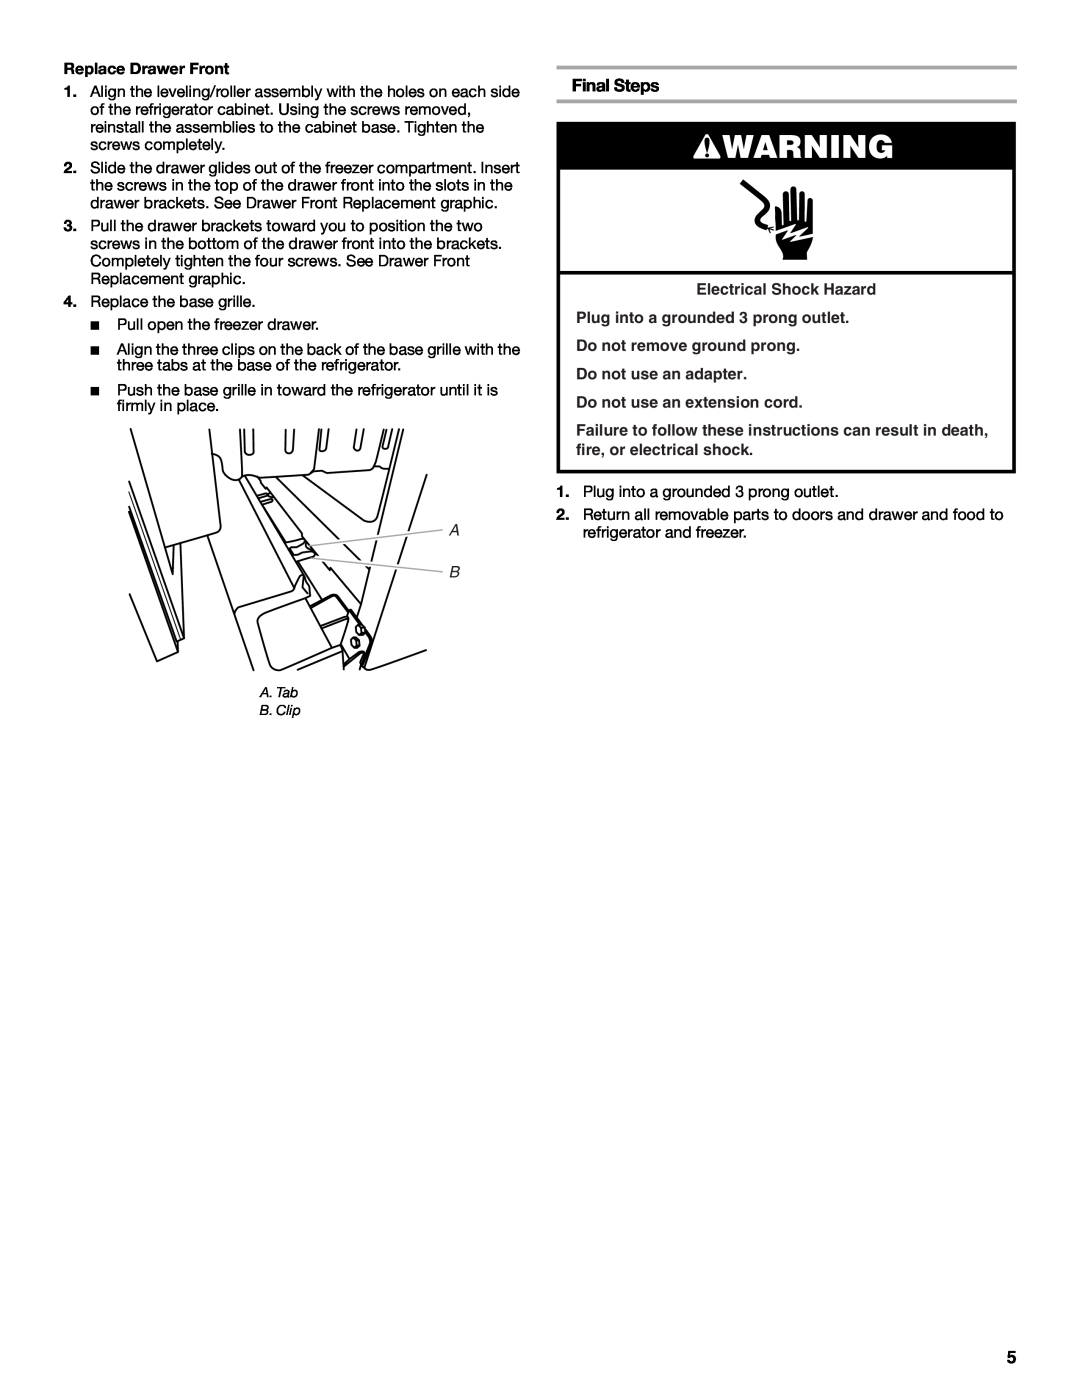 Maytag W10400978A Final Steps, Replace Drawer Front, Electrical Shock Hazard Plug into a grounded 3 prong outlet 